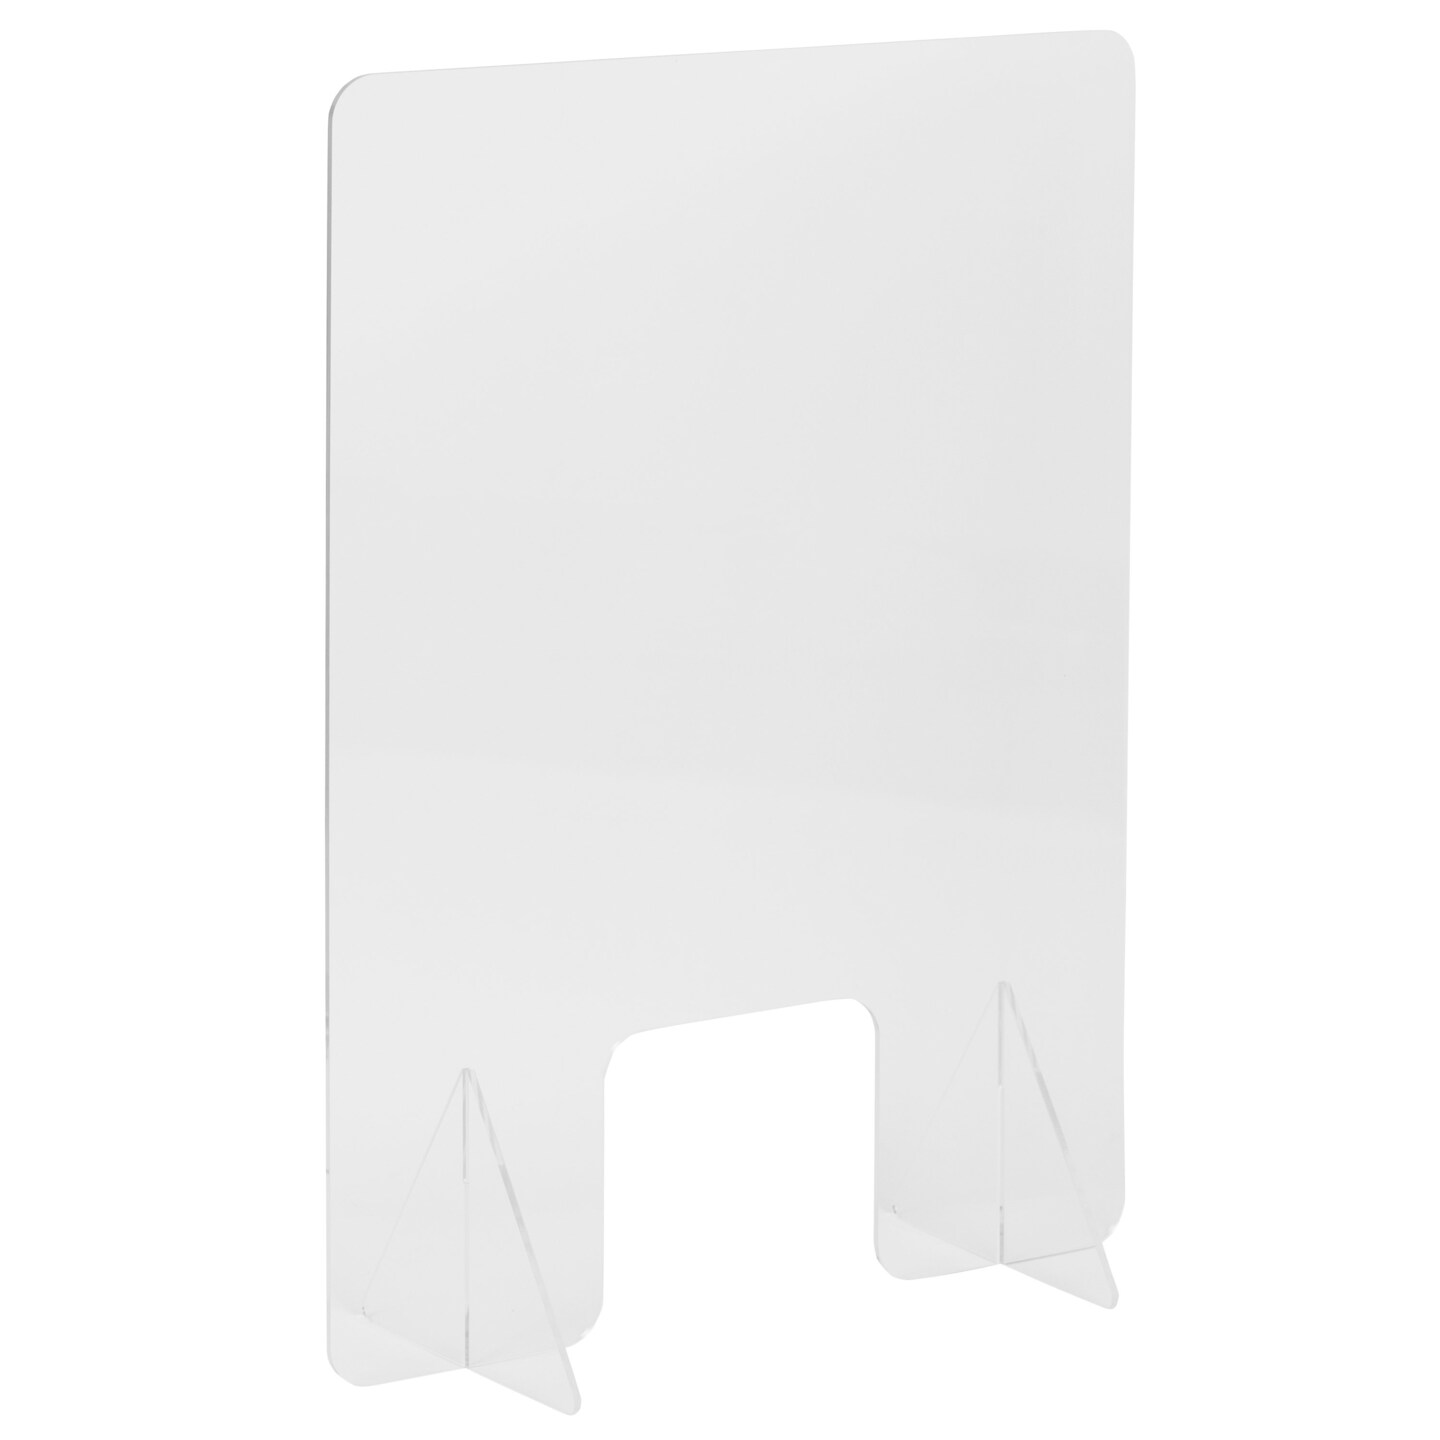 Emma and Oliver Acrylic Free-Standing Register Shield / Sneeze Guard with Pass-Through Opening